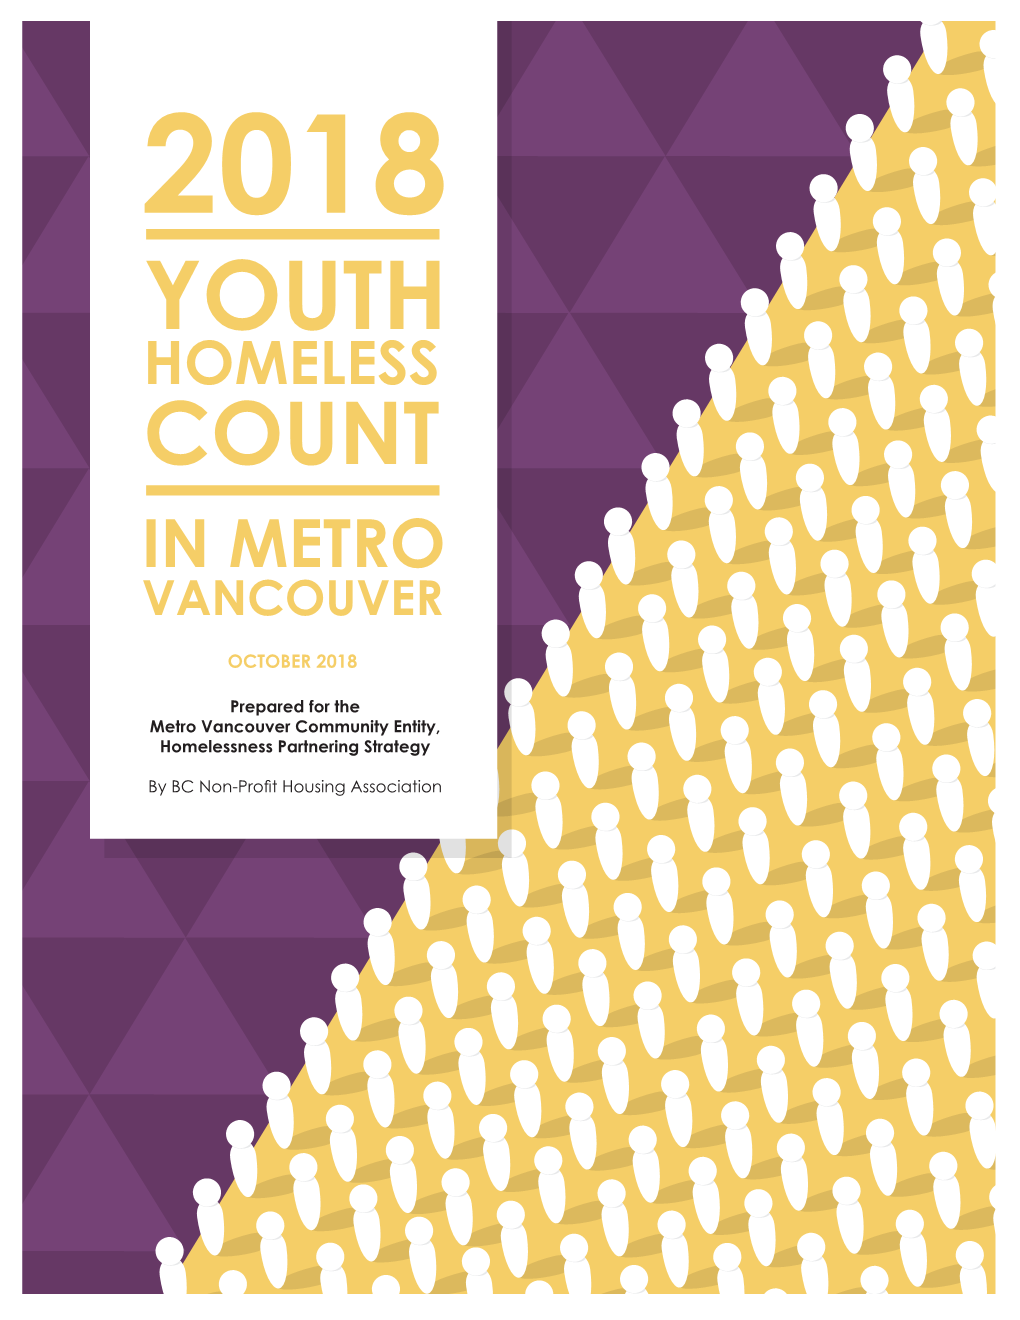 The 2018 Youth Homeless Count